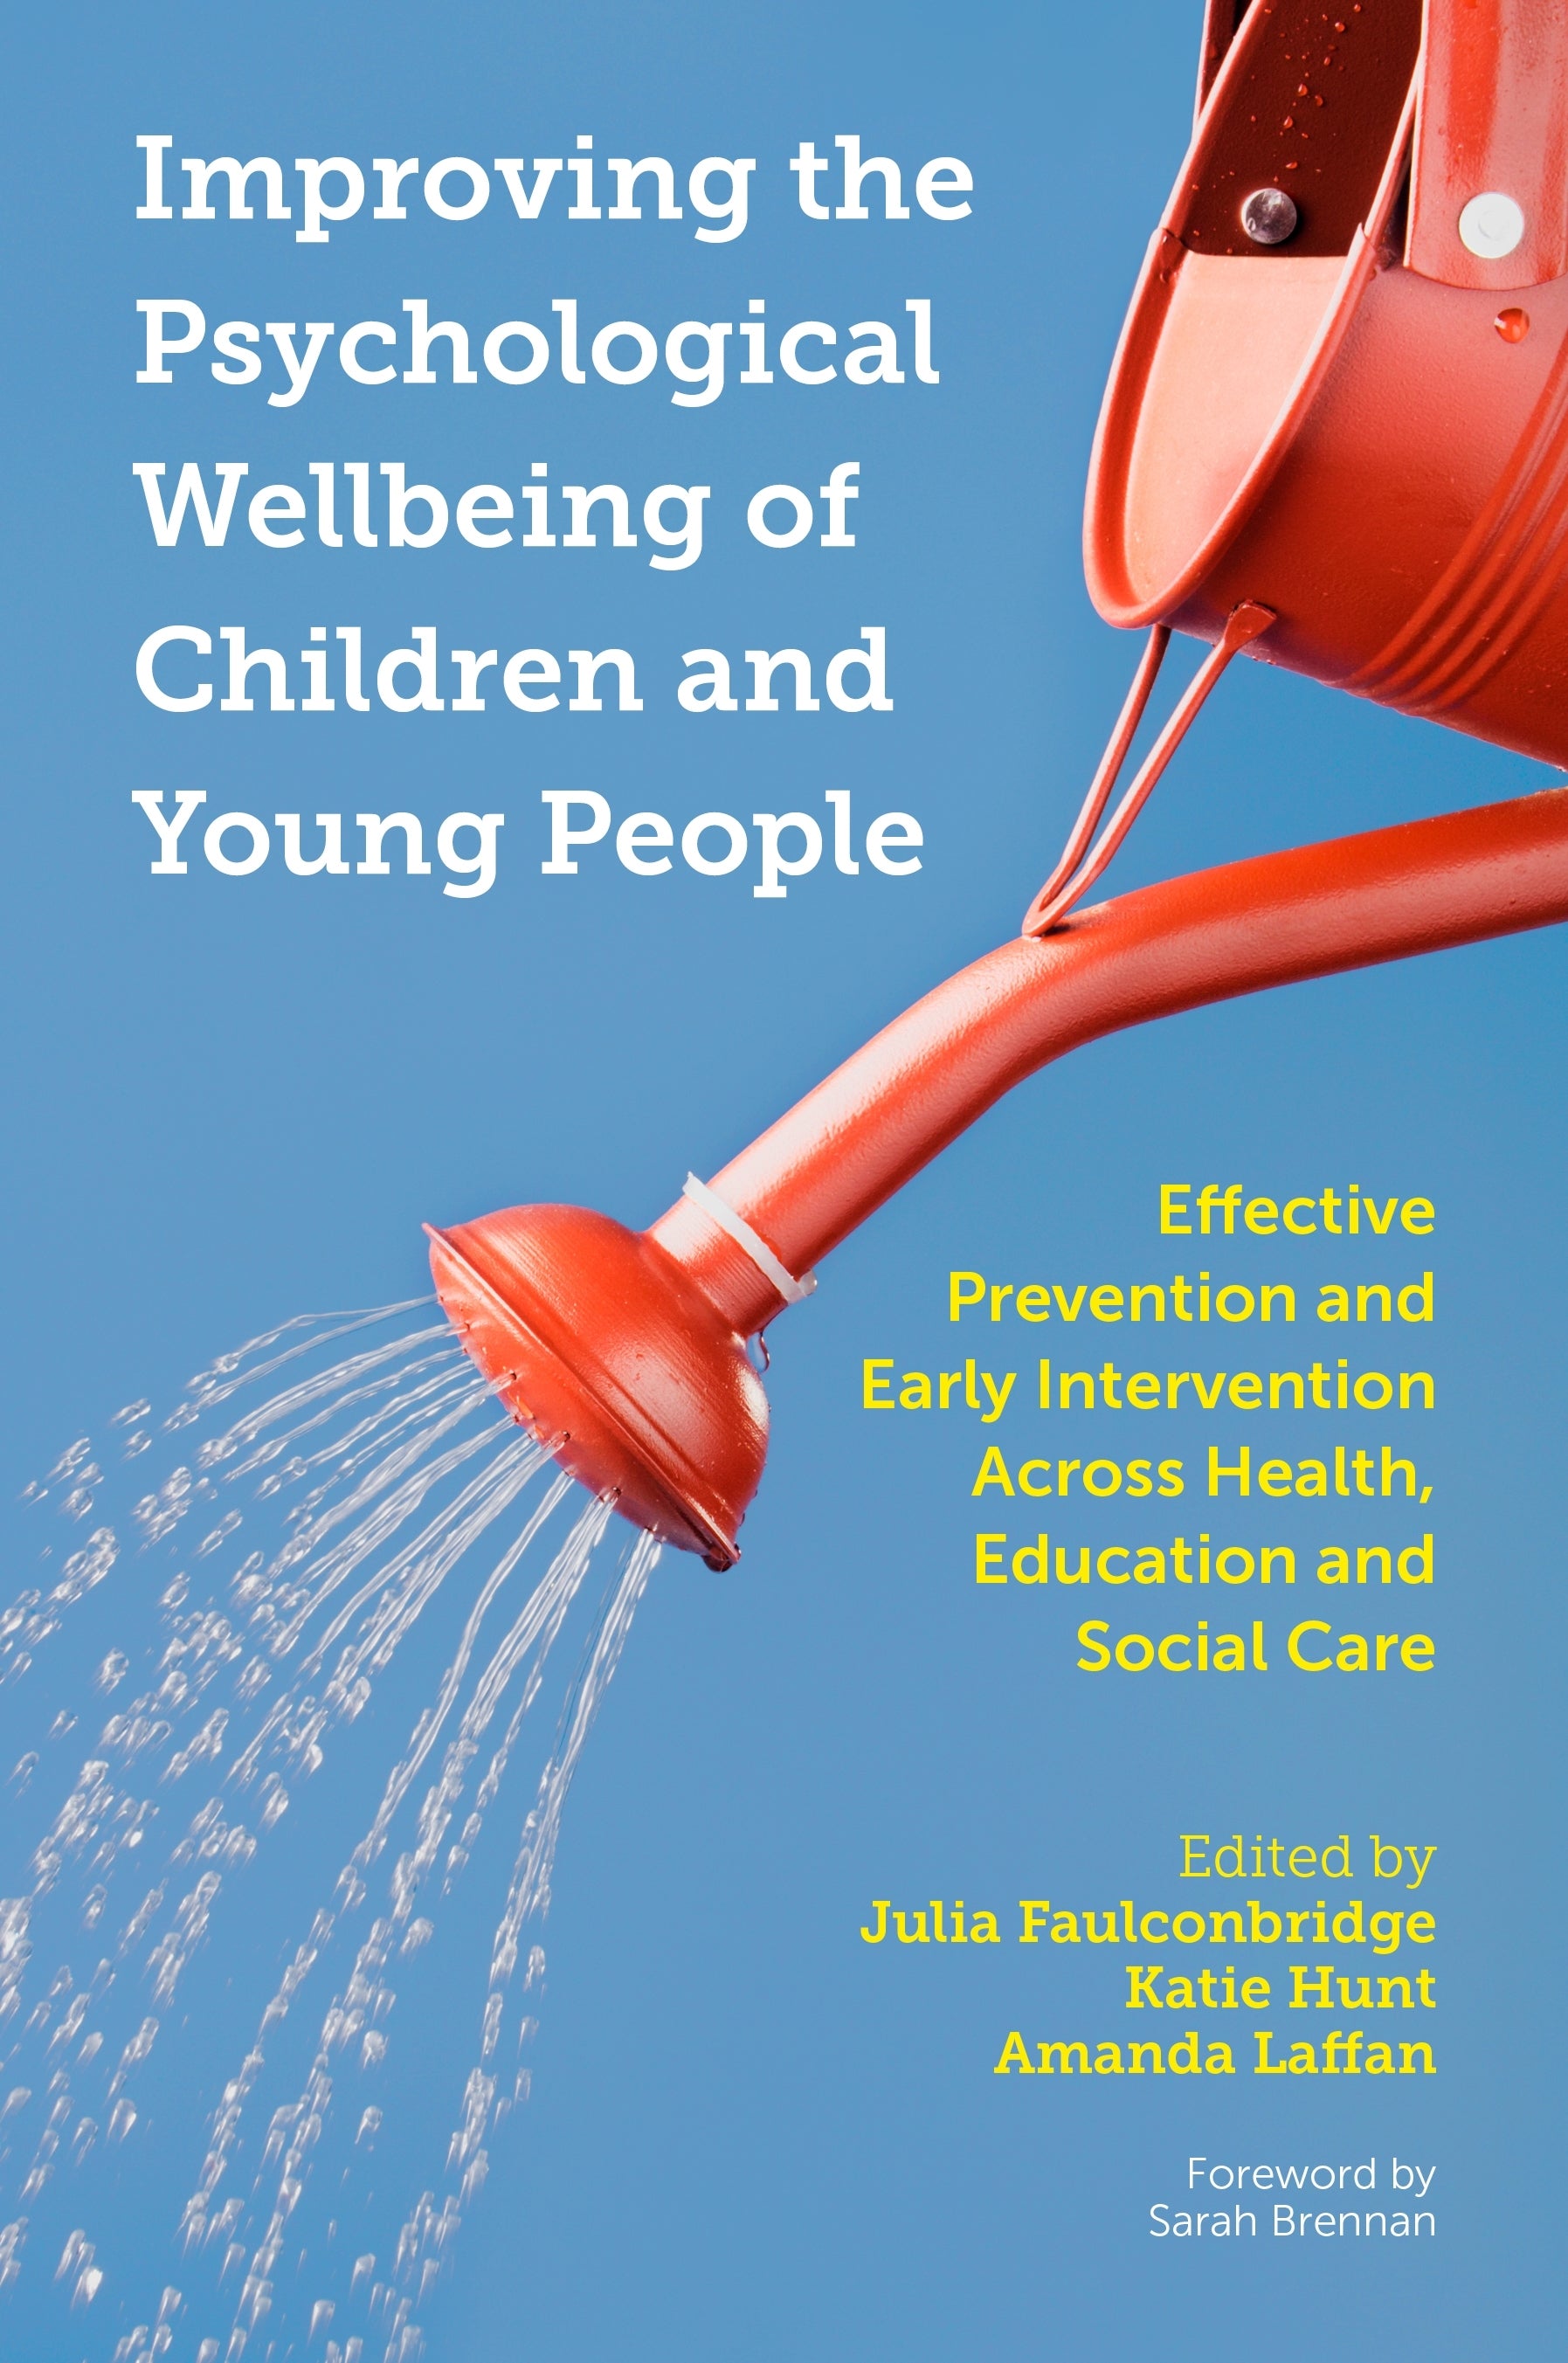 Improving the Psychological Wellbeing of Children and Young People by Julia Faulconbridge, Katie Hunt, Amanda Laffan, No Author Listed, Sarah Brennan